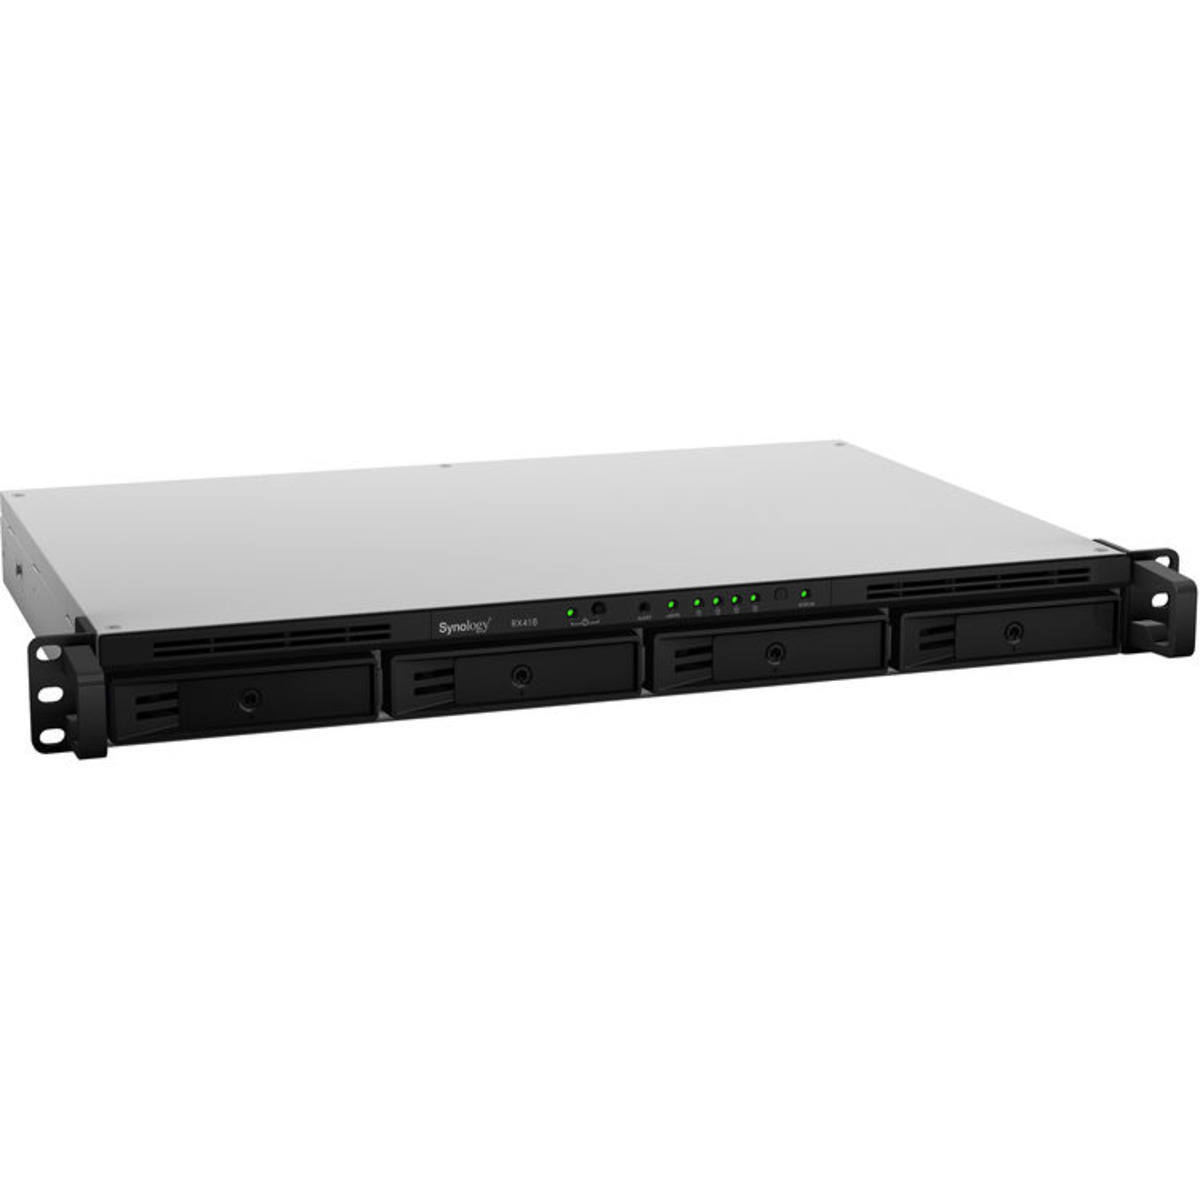 Synology RX418 External Expansion Drive 56tb 4-Bay RackMount Multimedia / Power User / Business Expansion Enclosure 4x14tb Western Digital Ultrastar DC HC530 WUH721414ALE6L4 3.5 7200rpm SATA 6Gb/s HDD ENTERPRISE Class Drives Installed - Burn-In Tested RX418 External Expansion Drive